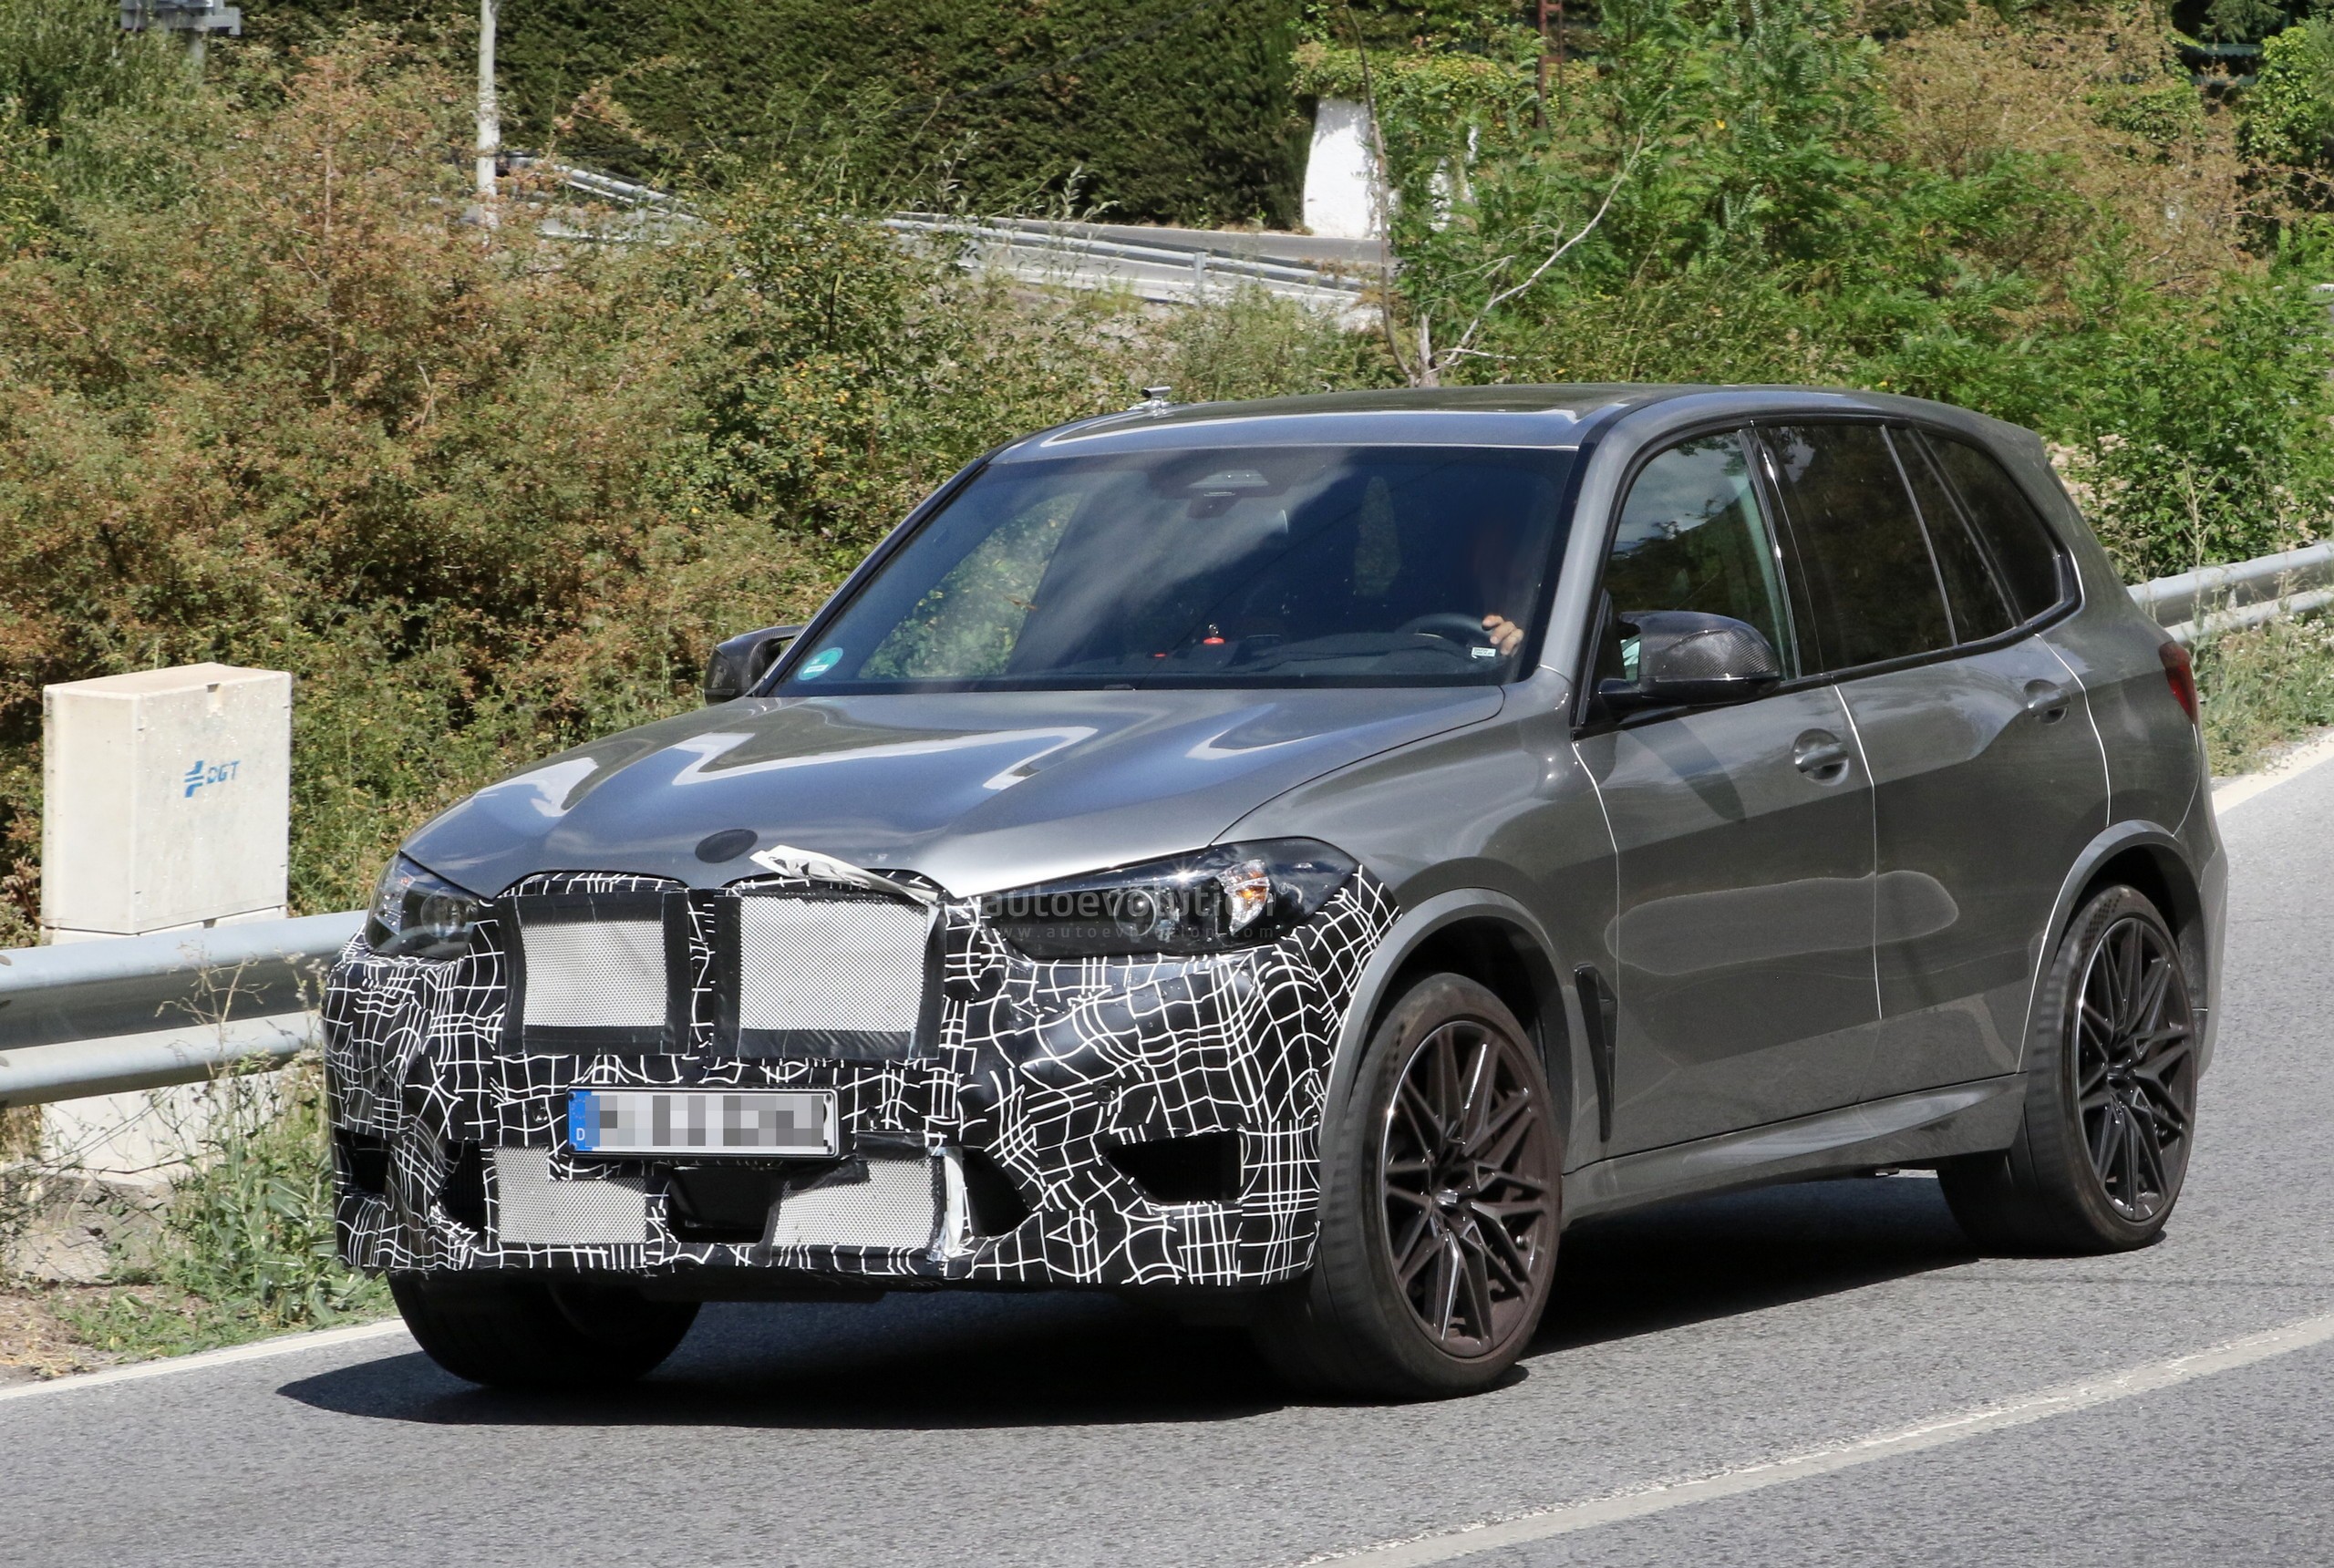 https://s1.cdn.autoevolution.com/images/news/gallery/g05-bmw-x5-m-lci-makes-surprise-appearance-with-almost-no-camouflage-on-the-body_5.jpg